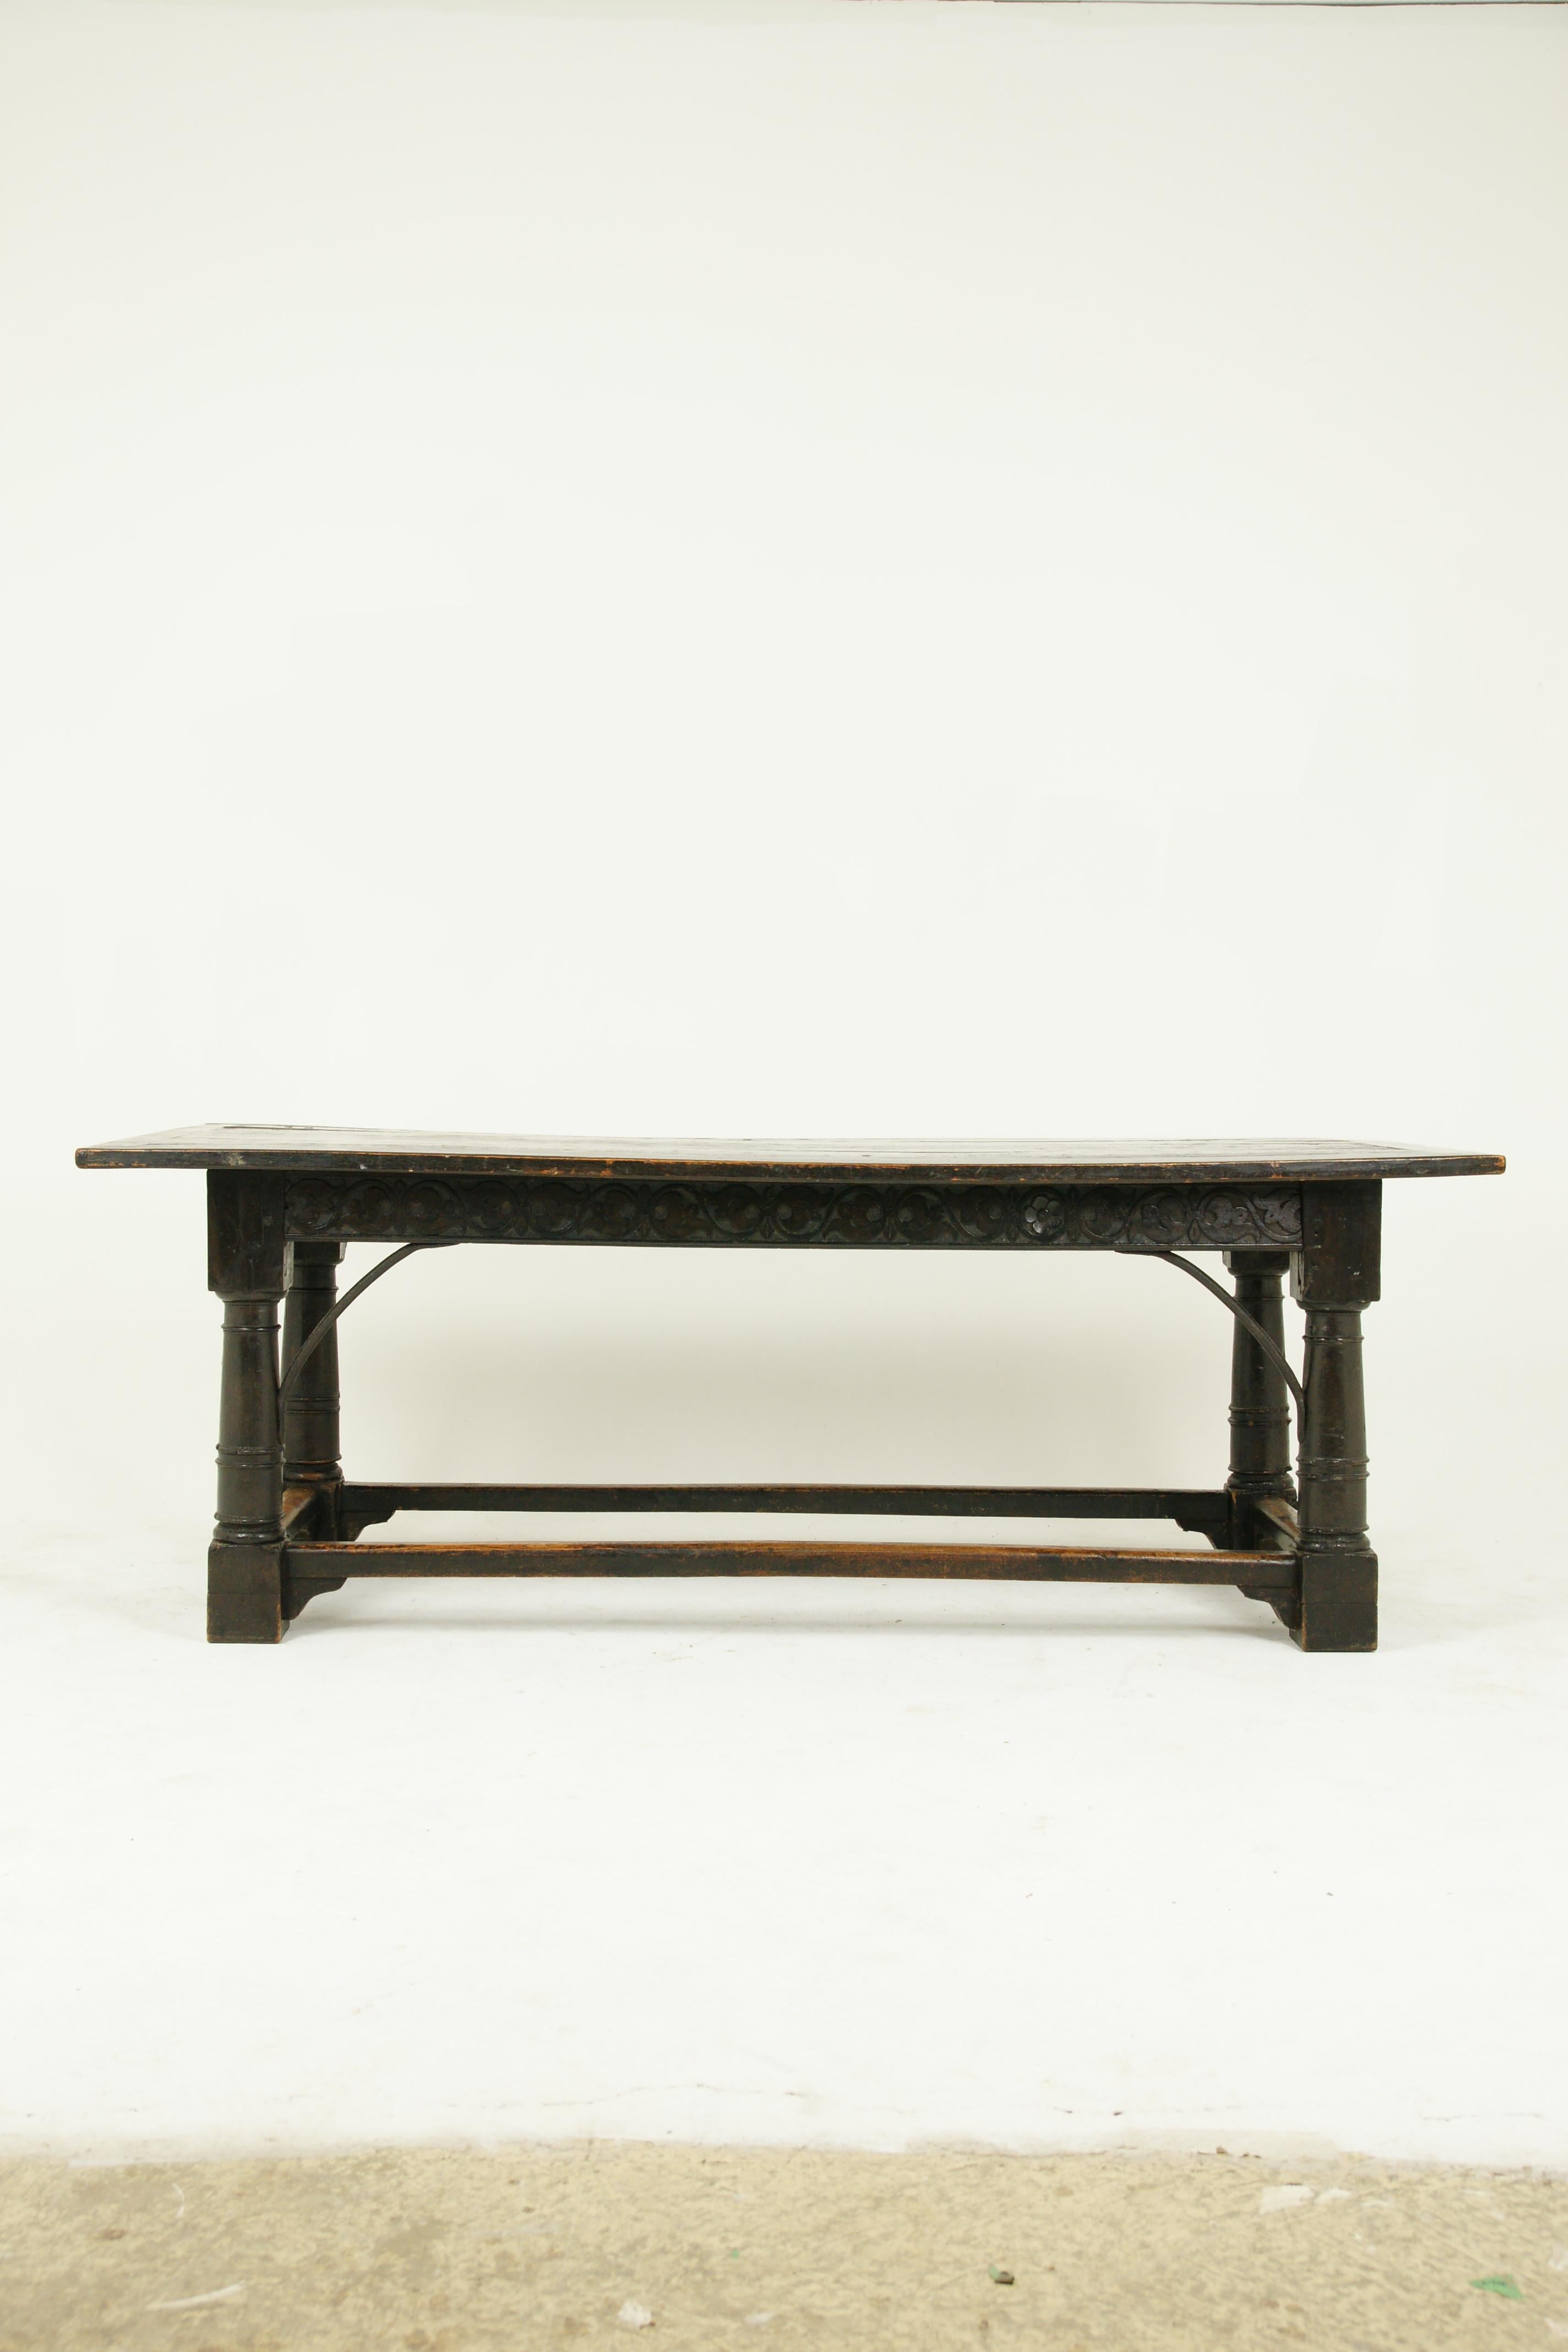 Antique Oak Table, Refectory Table, Scotland 1780, Antique Furniture, B1543

Scotland 1870-1890
Solid Oak Construction
Rectangular Top with Four Planks
Base has a Carved Frieze with Flowers 
Raised on Cannon Barrel Supports with Peripheral